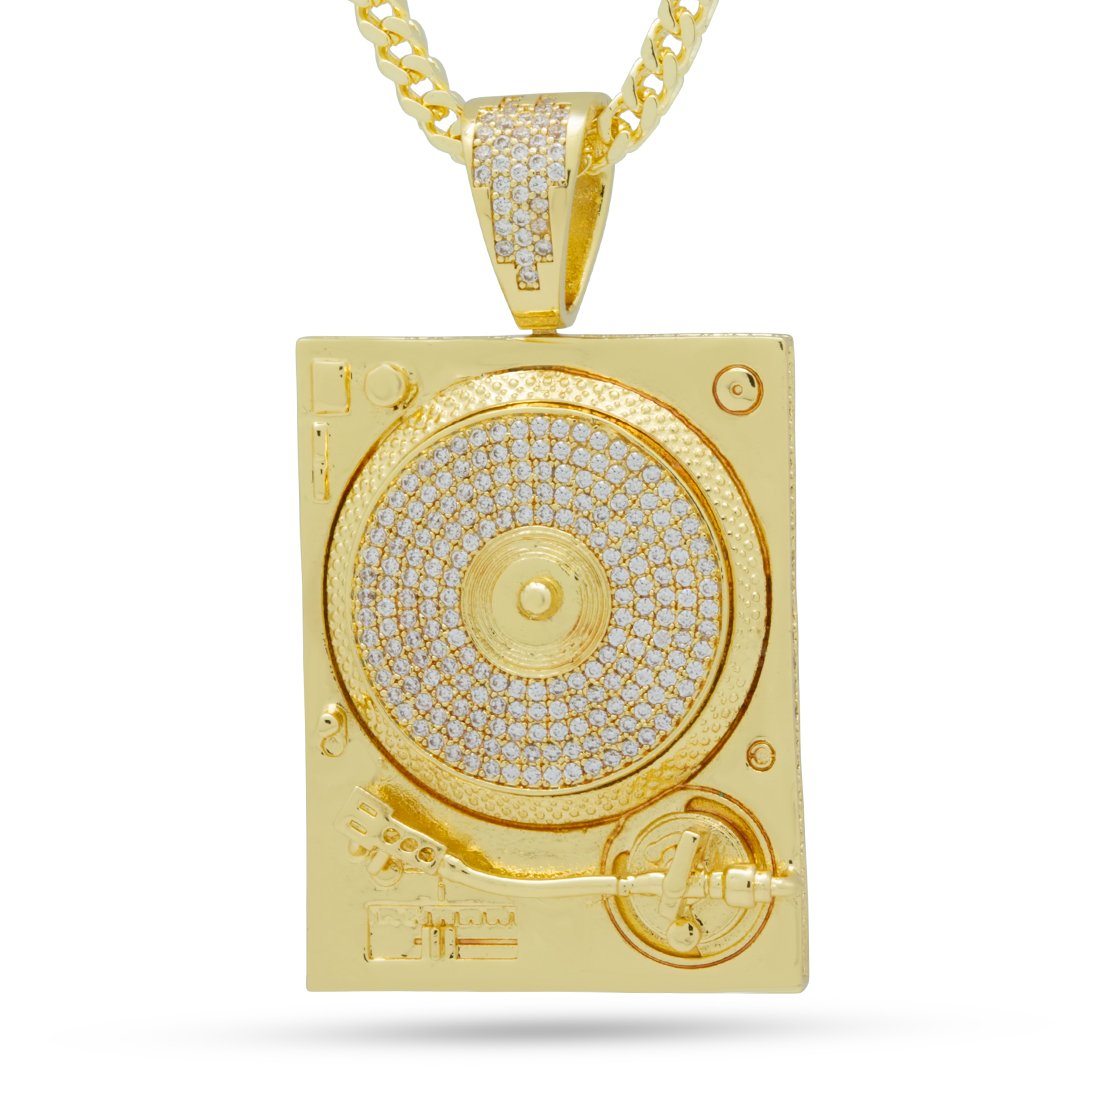 The Gold Turntable Necklace